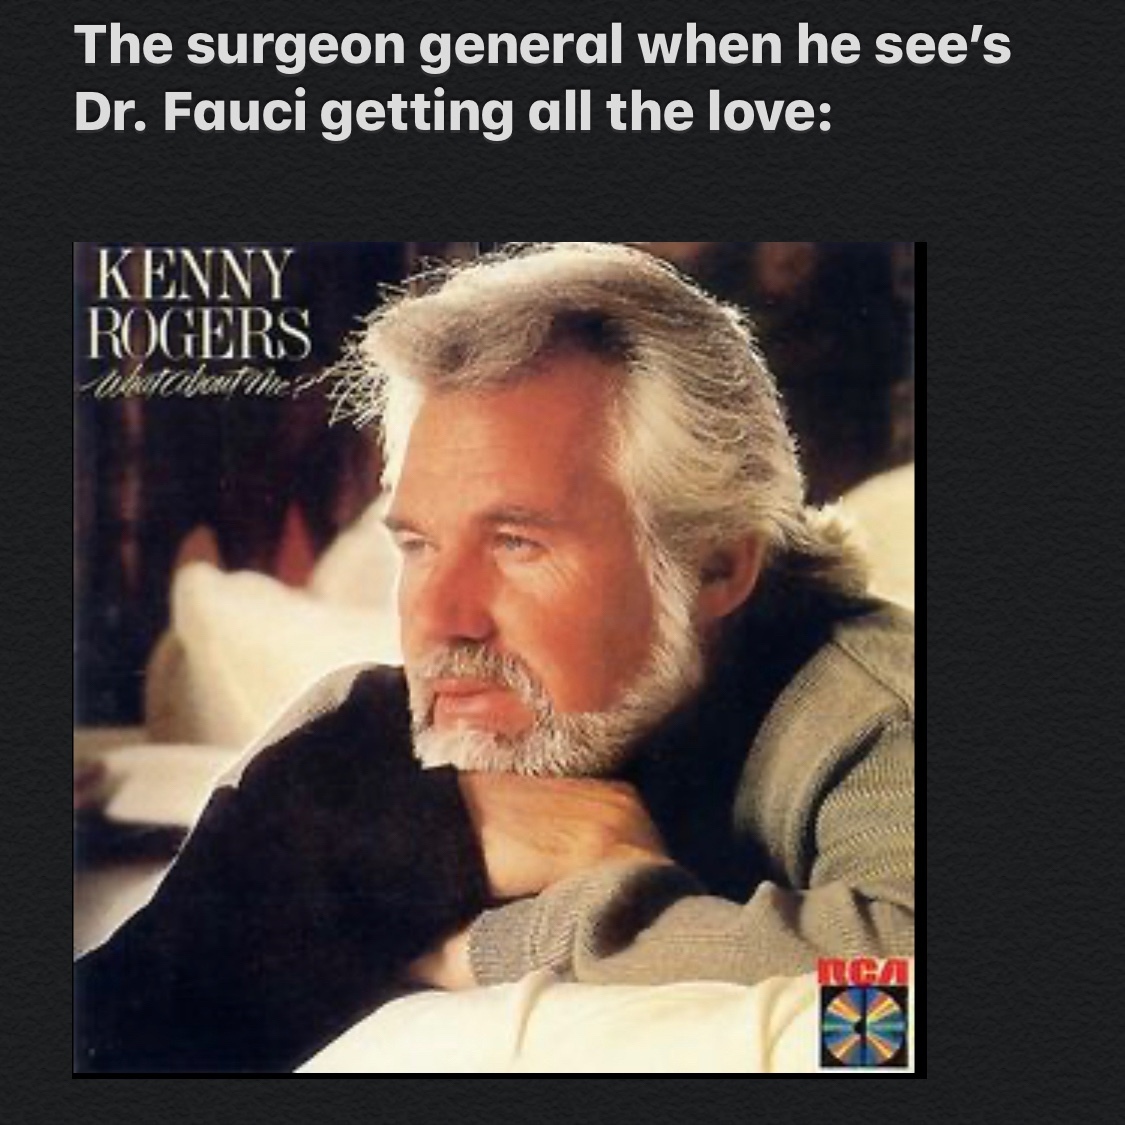 Kenny Rogers: What About Me? - meme